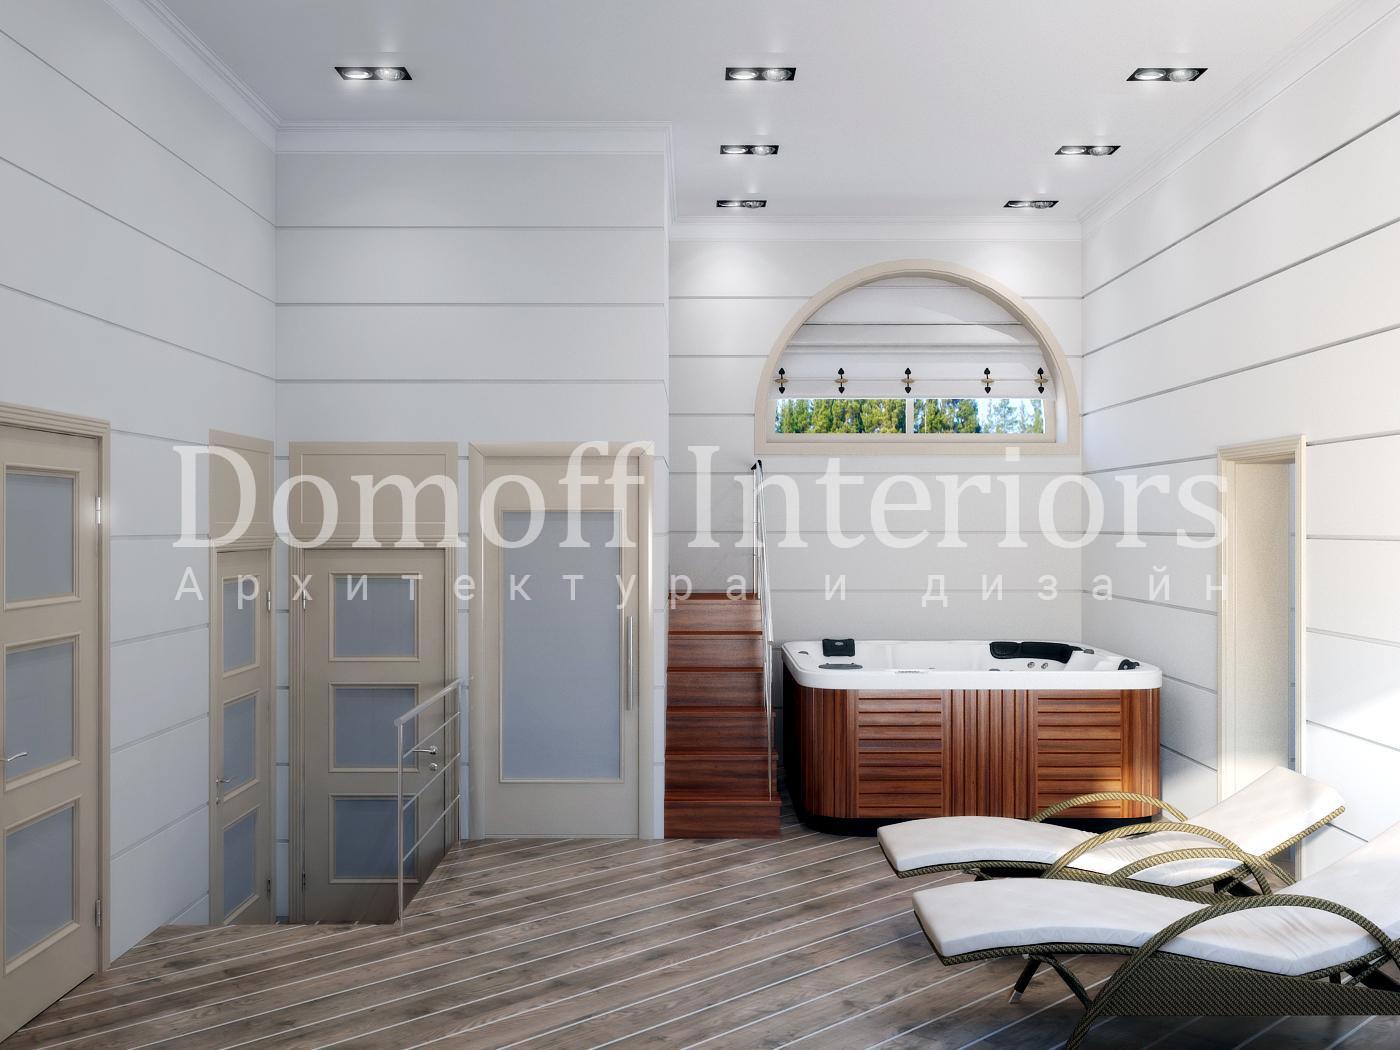 Spa room made in the style of Contemporary